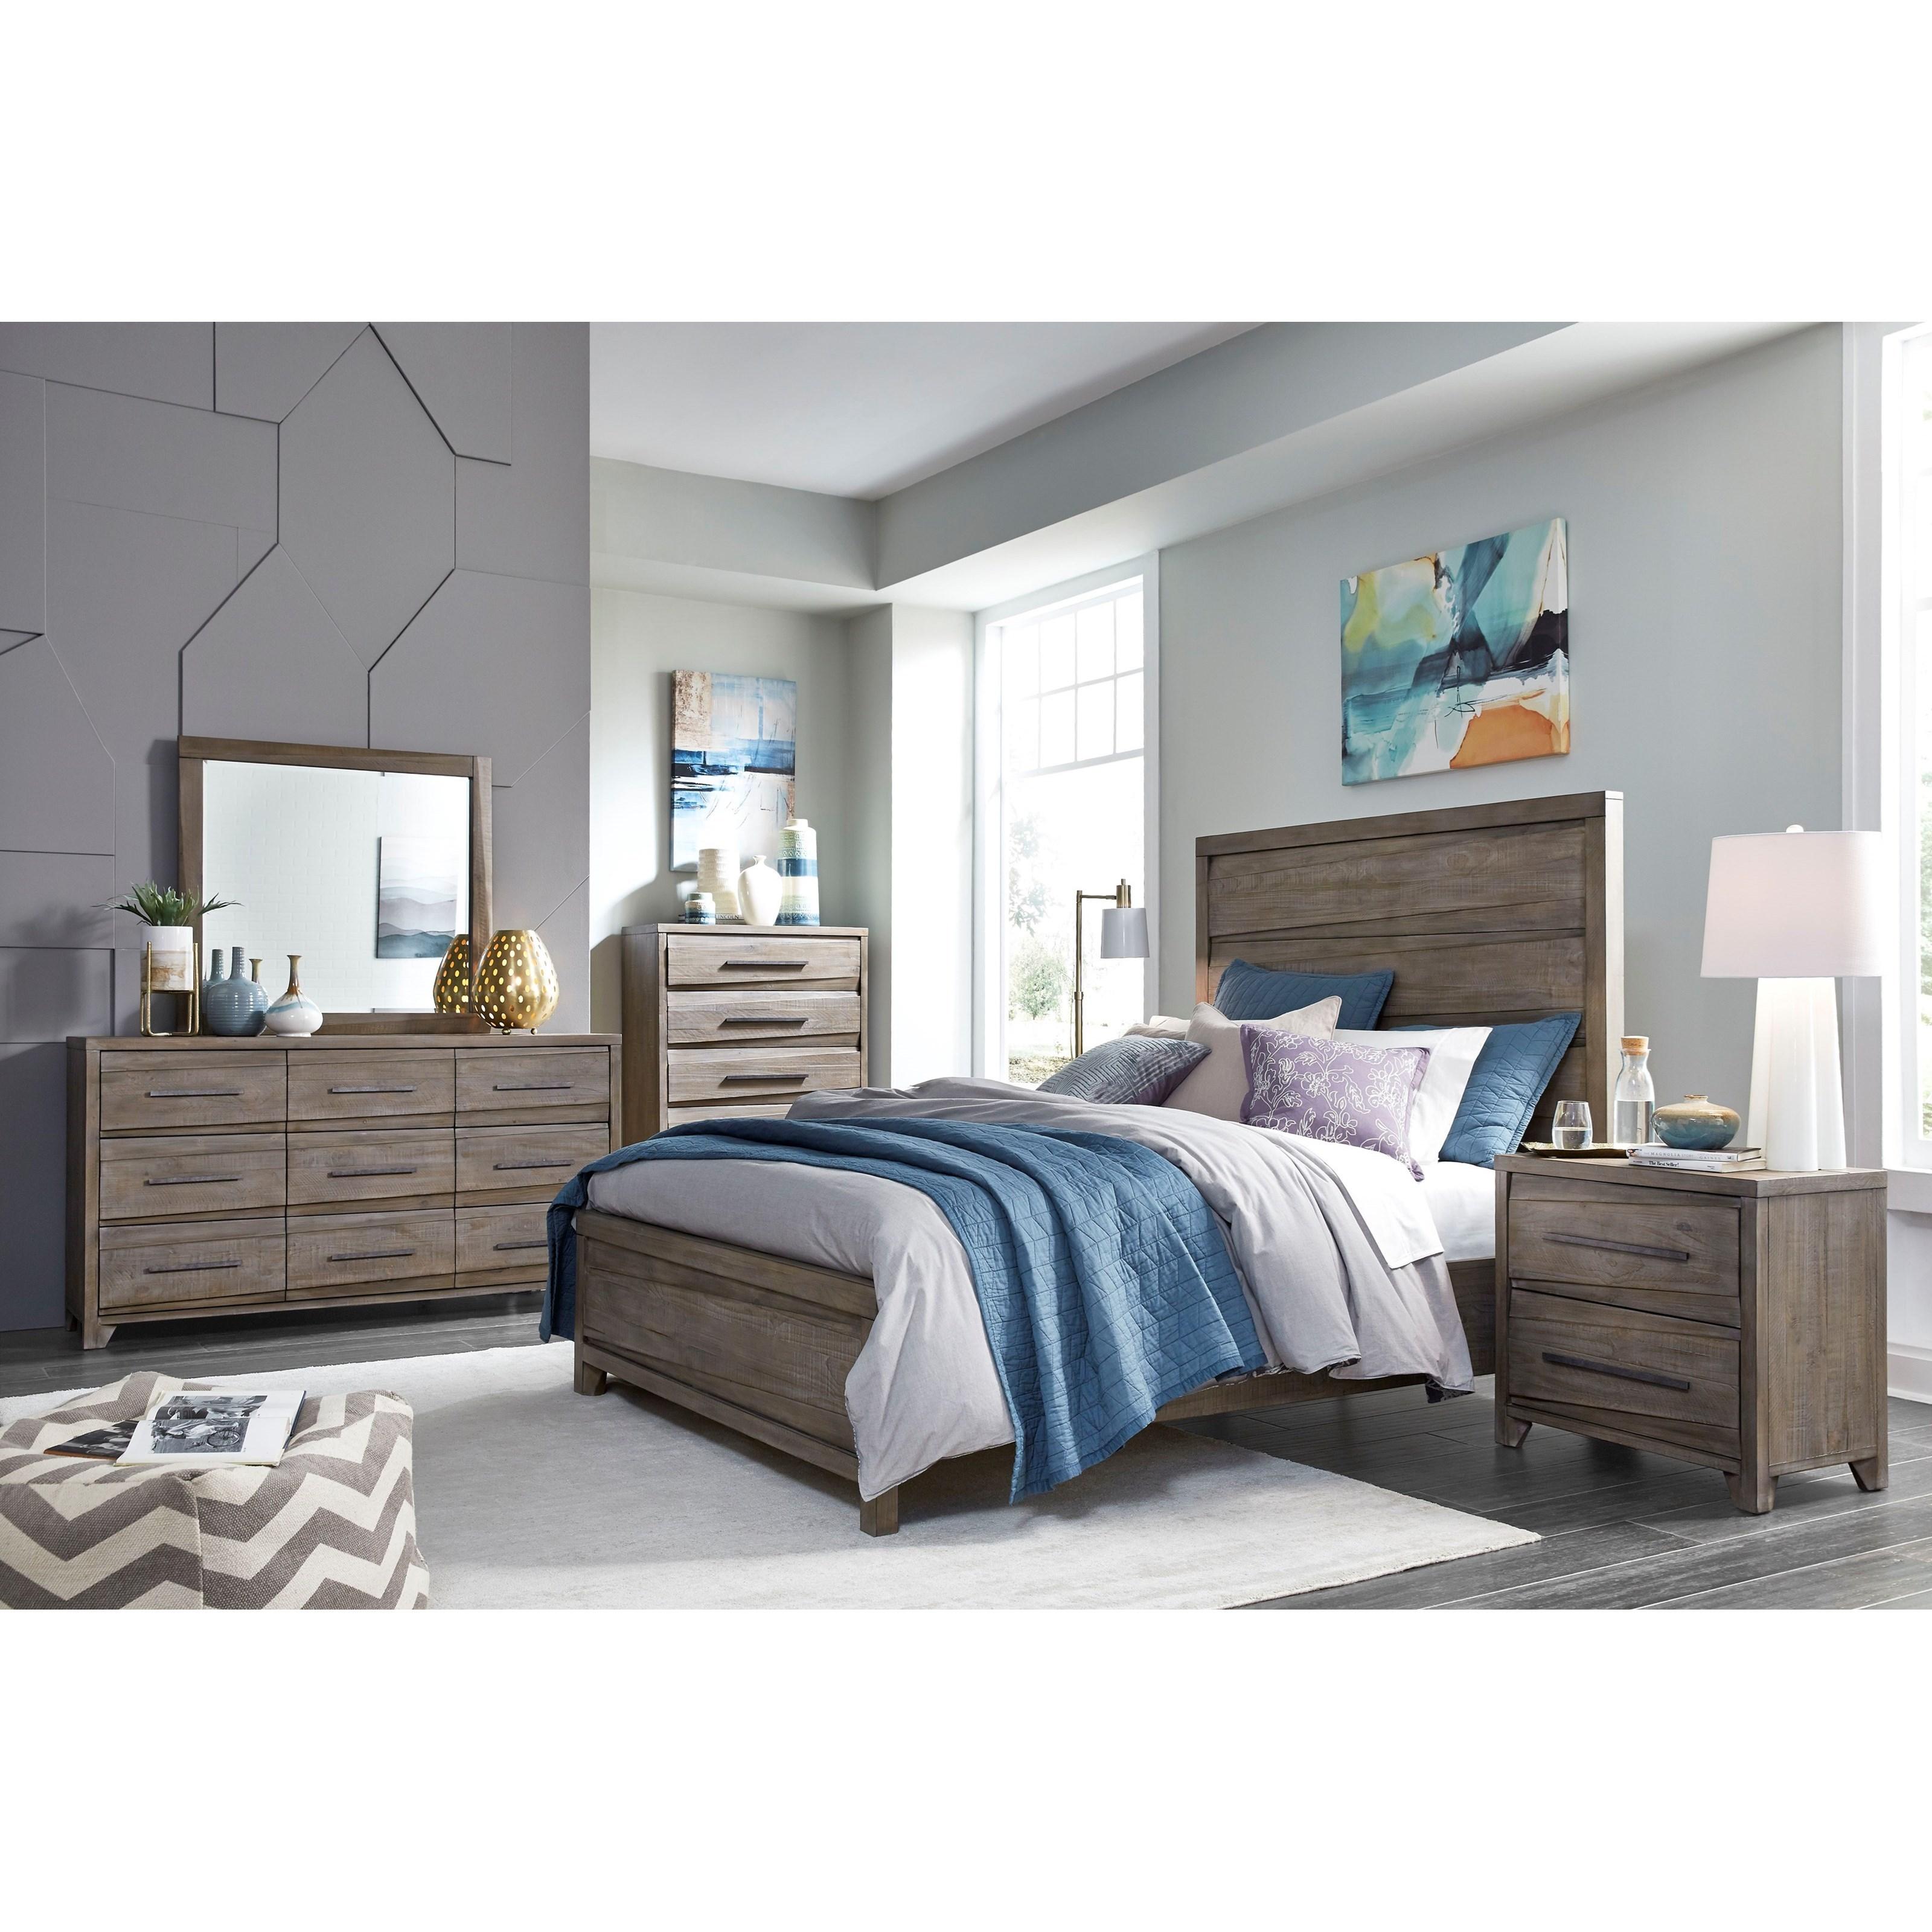 Casual, Rustic Panel Bedroom Set HEARST 6VF3A5-NDM-4PC in Tan 